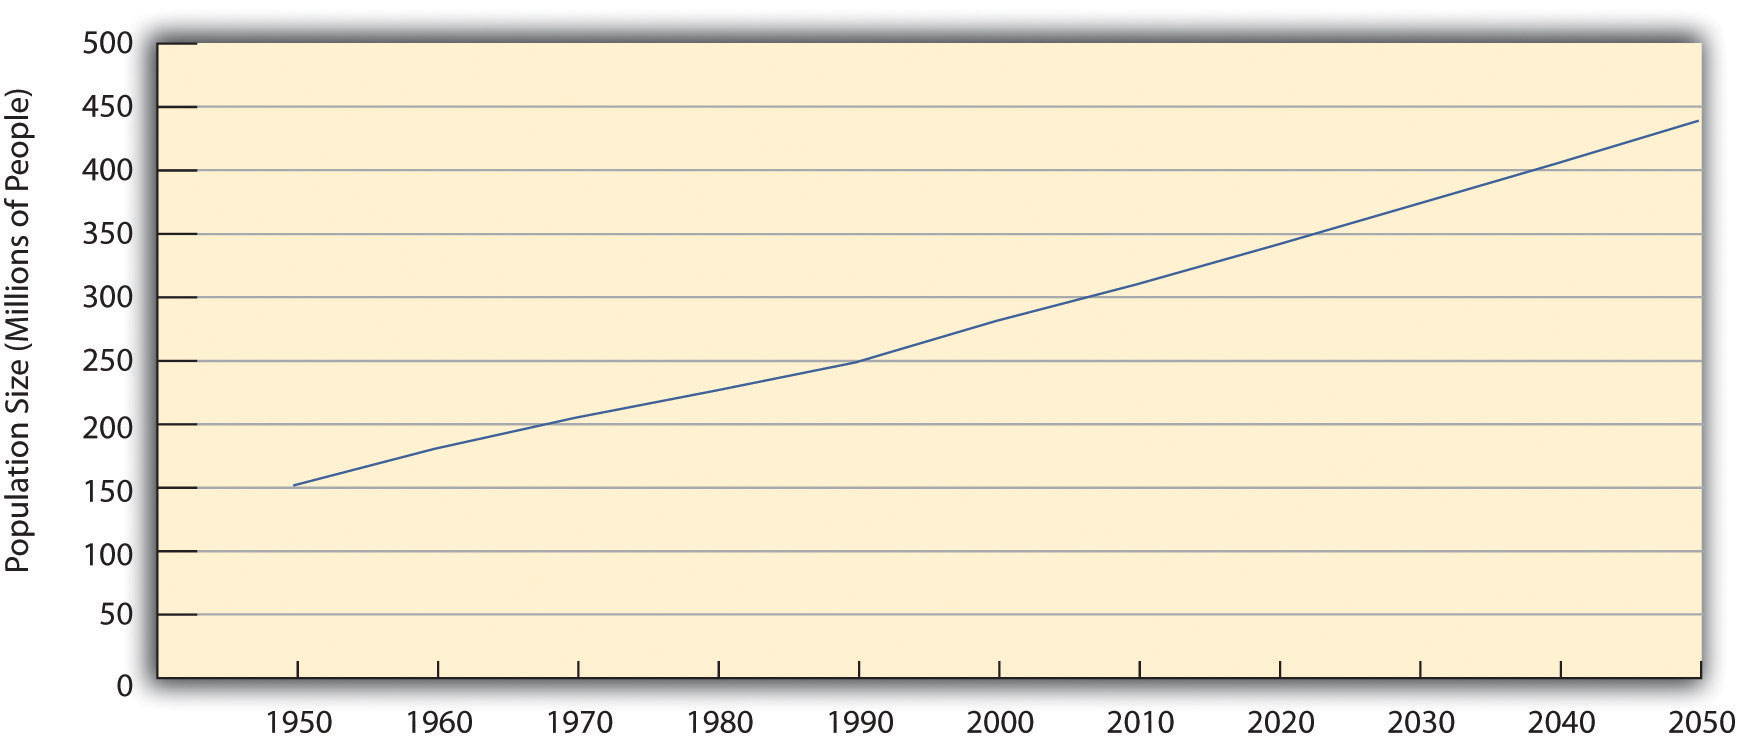 Past and Projected Size of the US Population, 1950-2050 shows a steady increase.